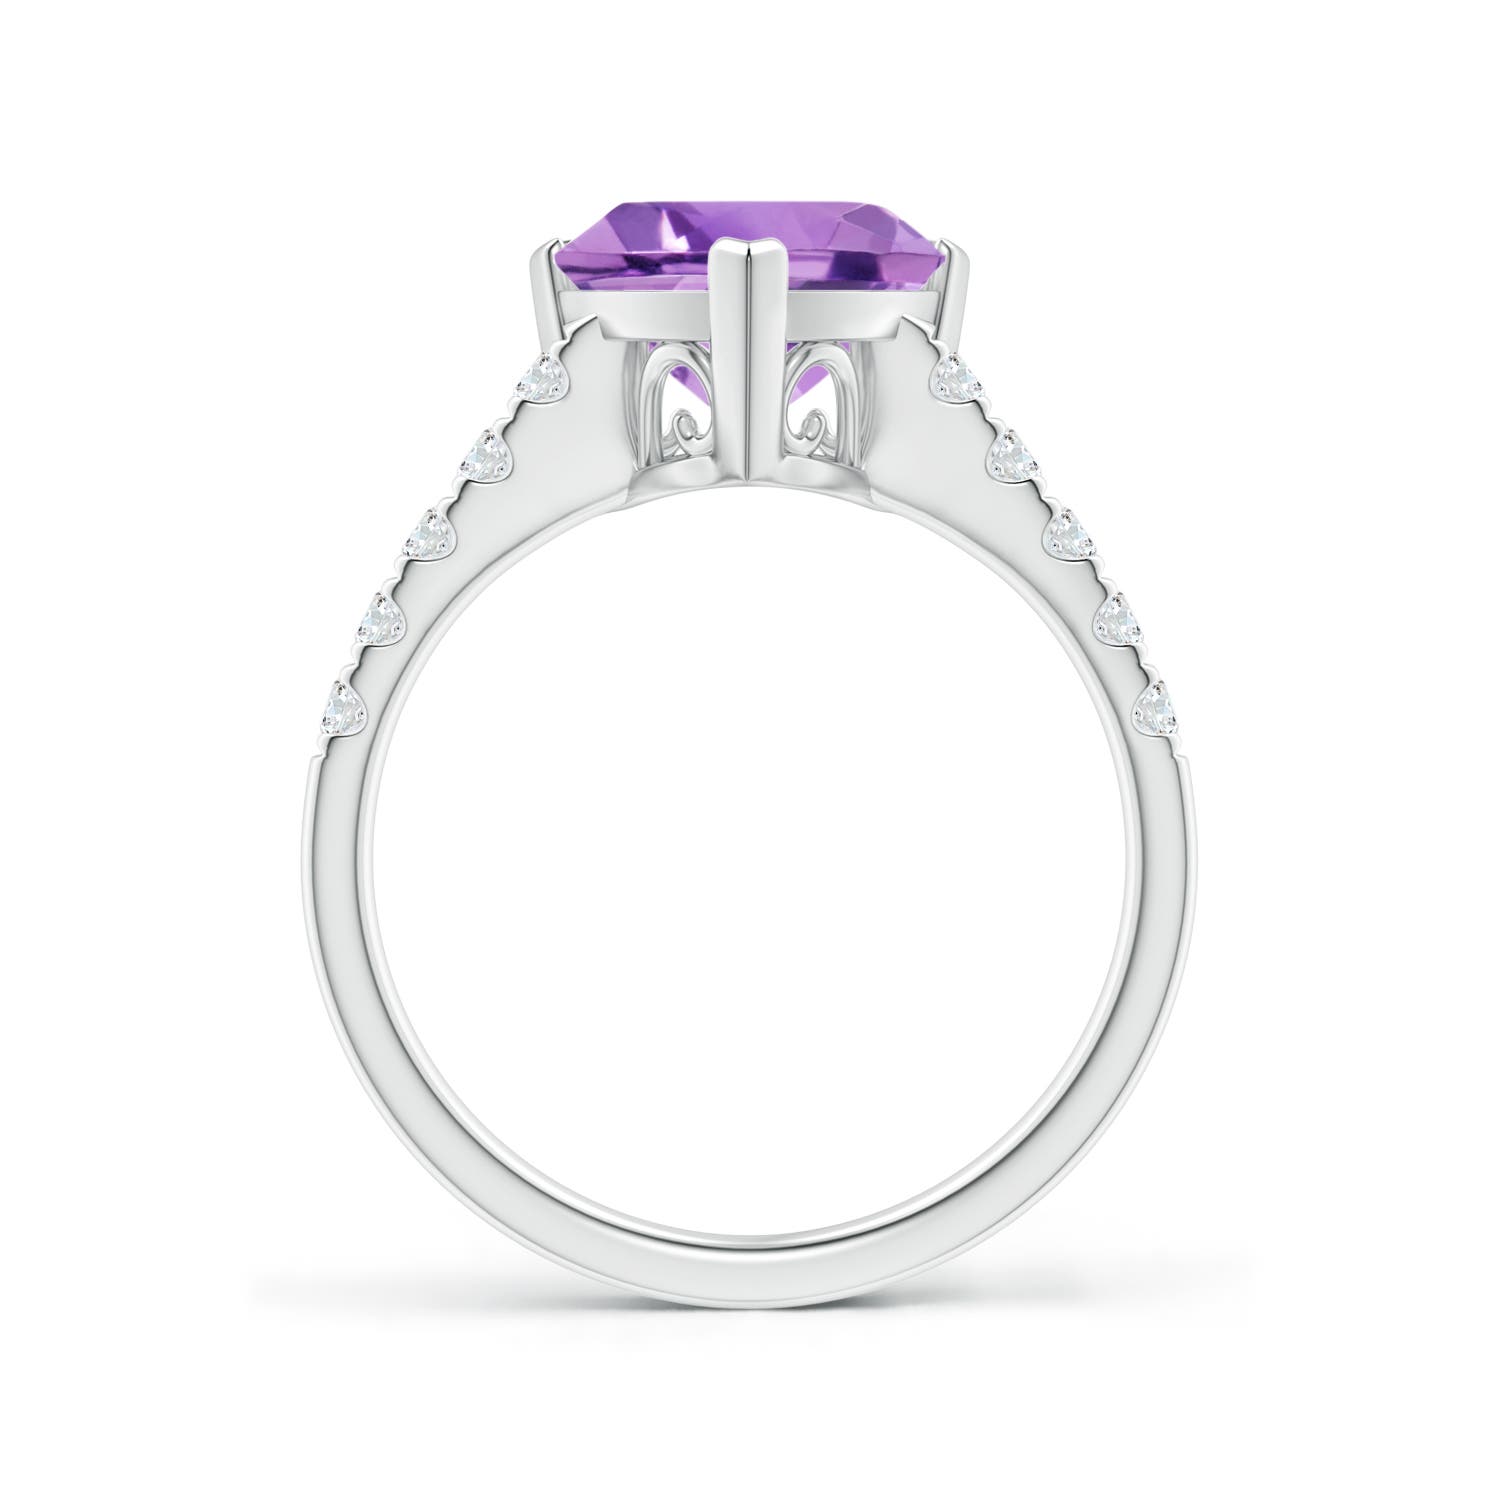 A - Amethyst / 2.53 CT / 14 KT White Gold